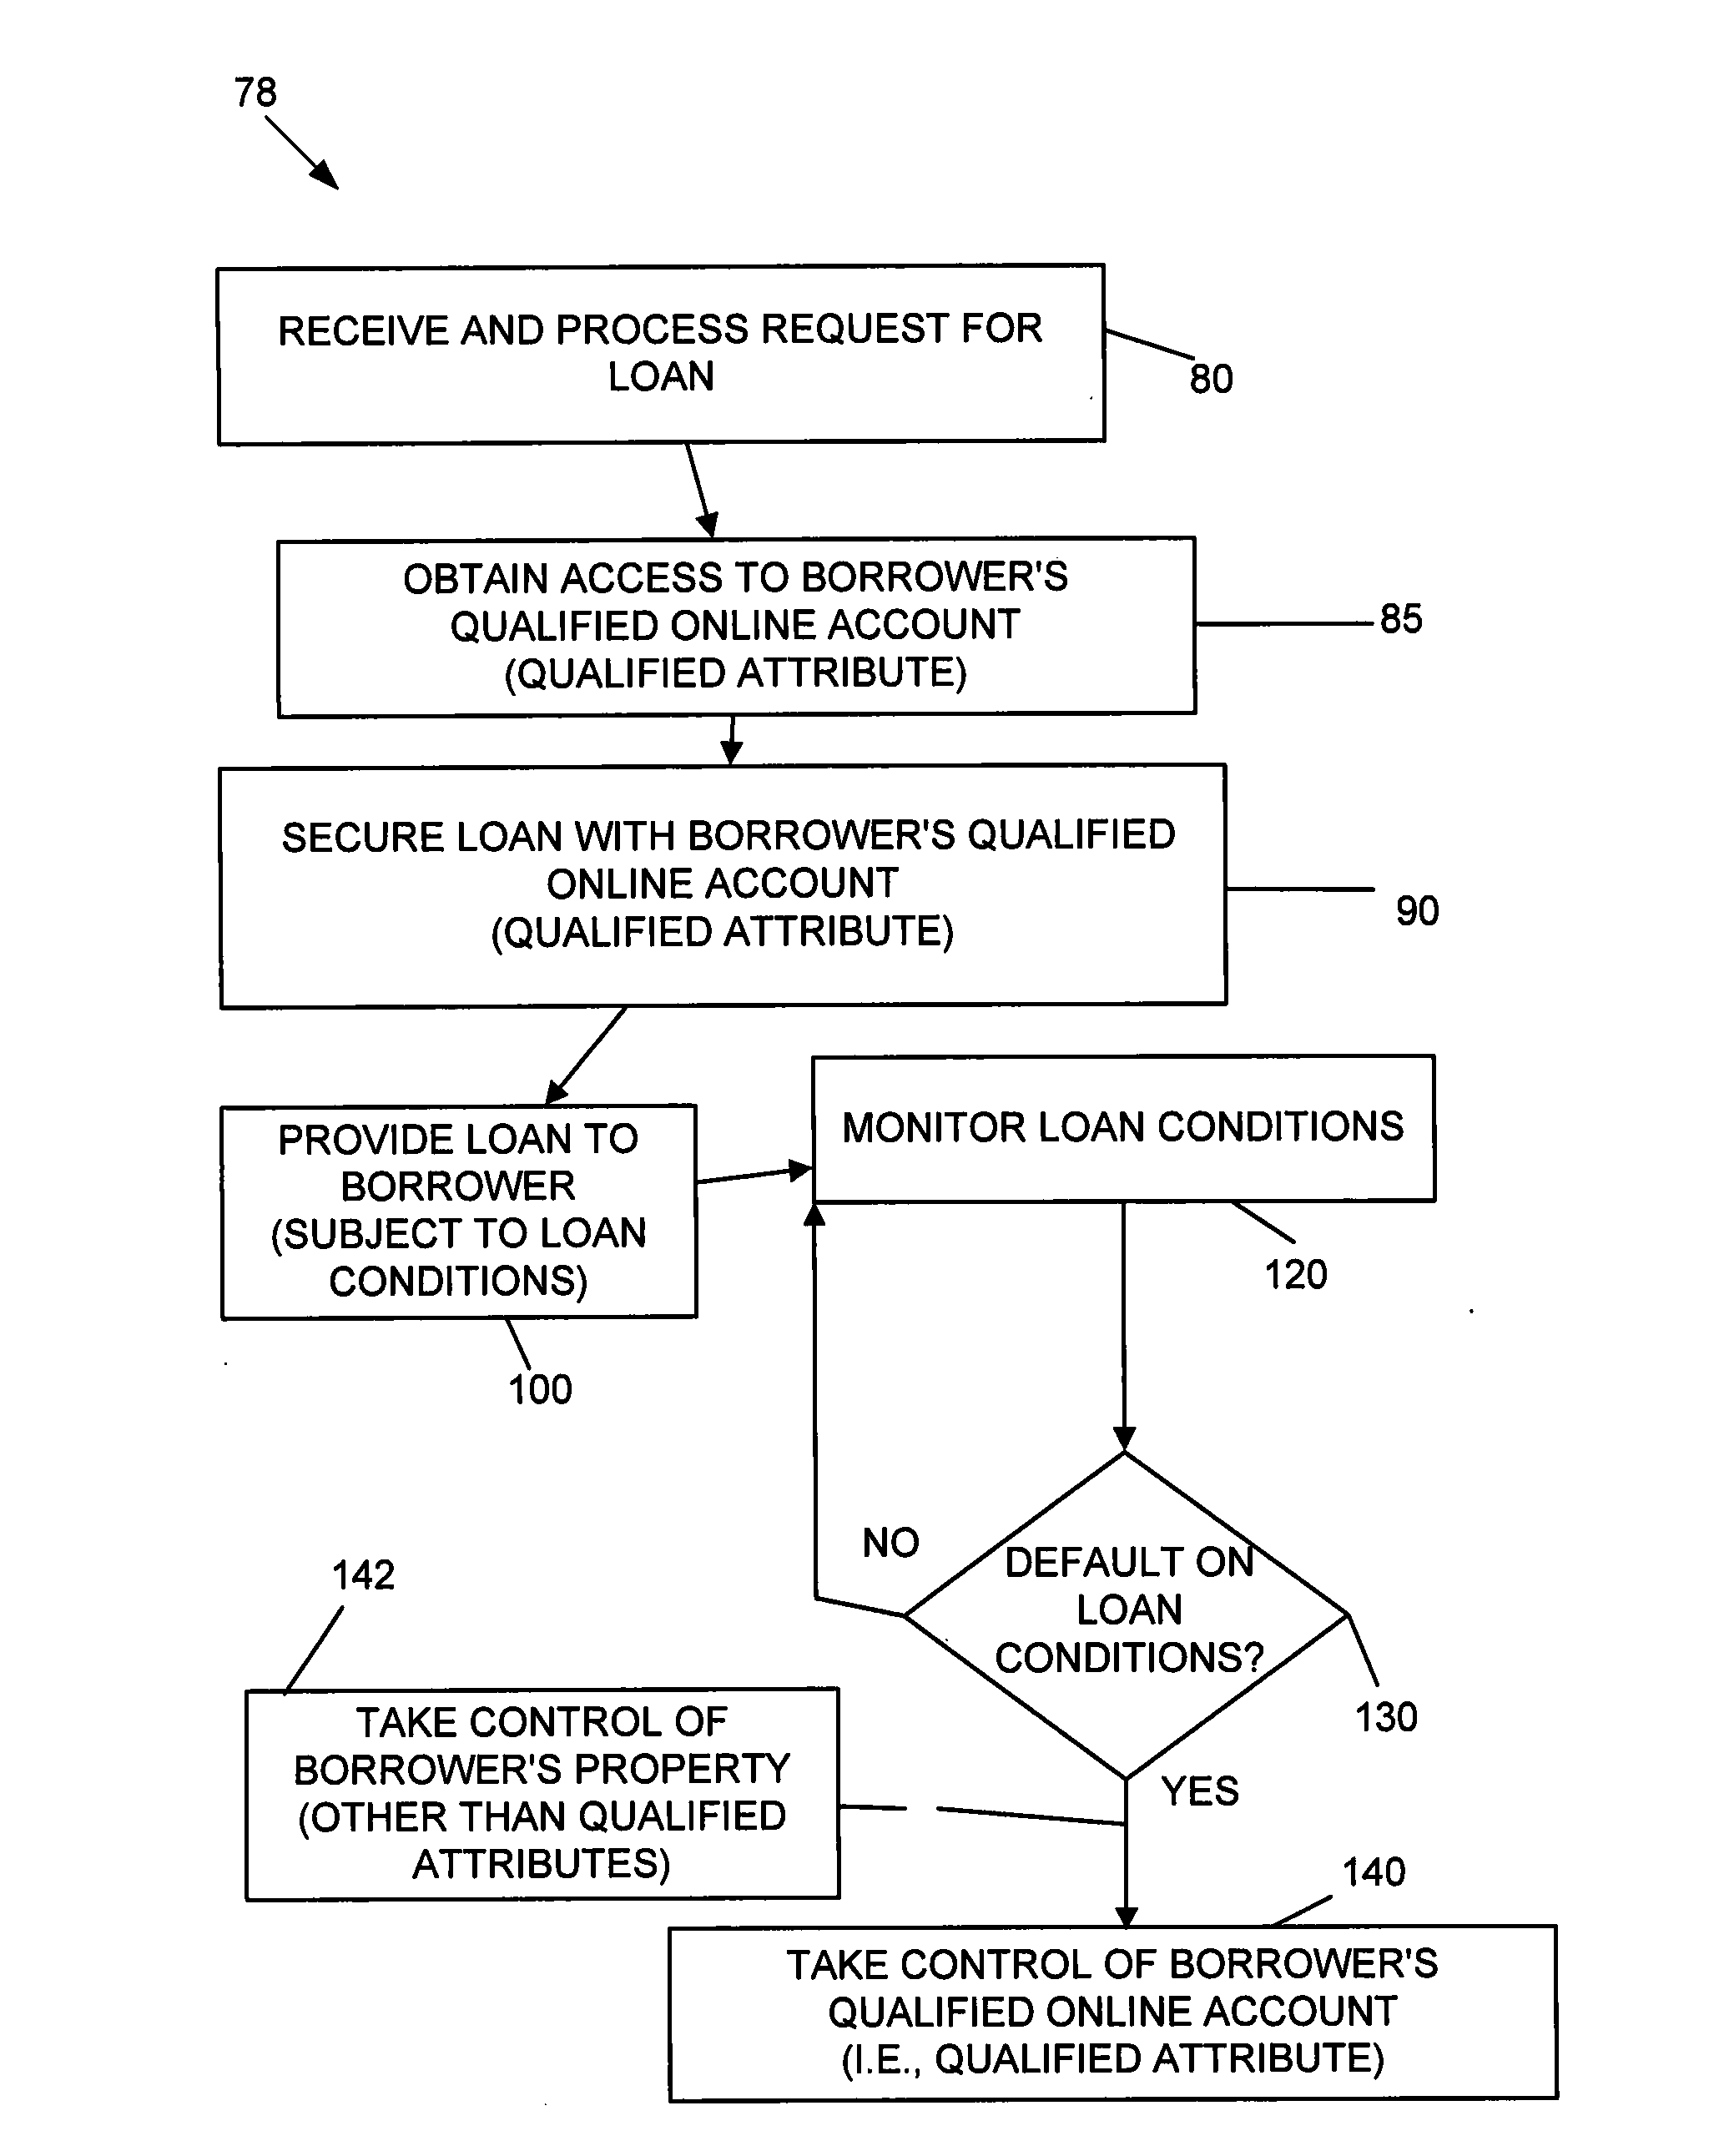 Methods and systems for improving timely loan repayment by controlling online accounts, notifying social contacts, using loan repayment coaches, or employing social graphs